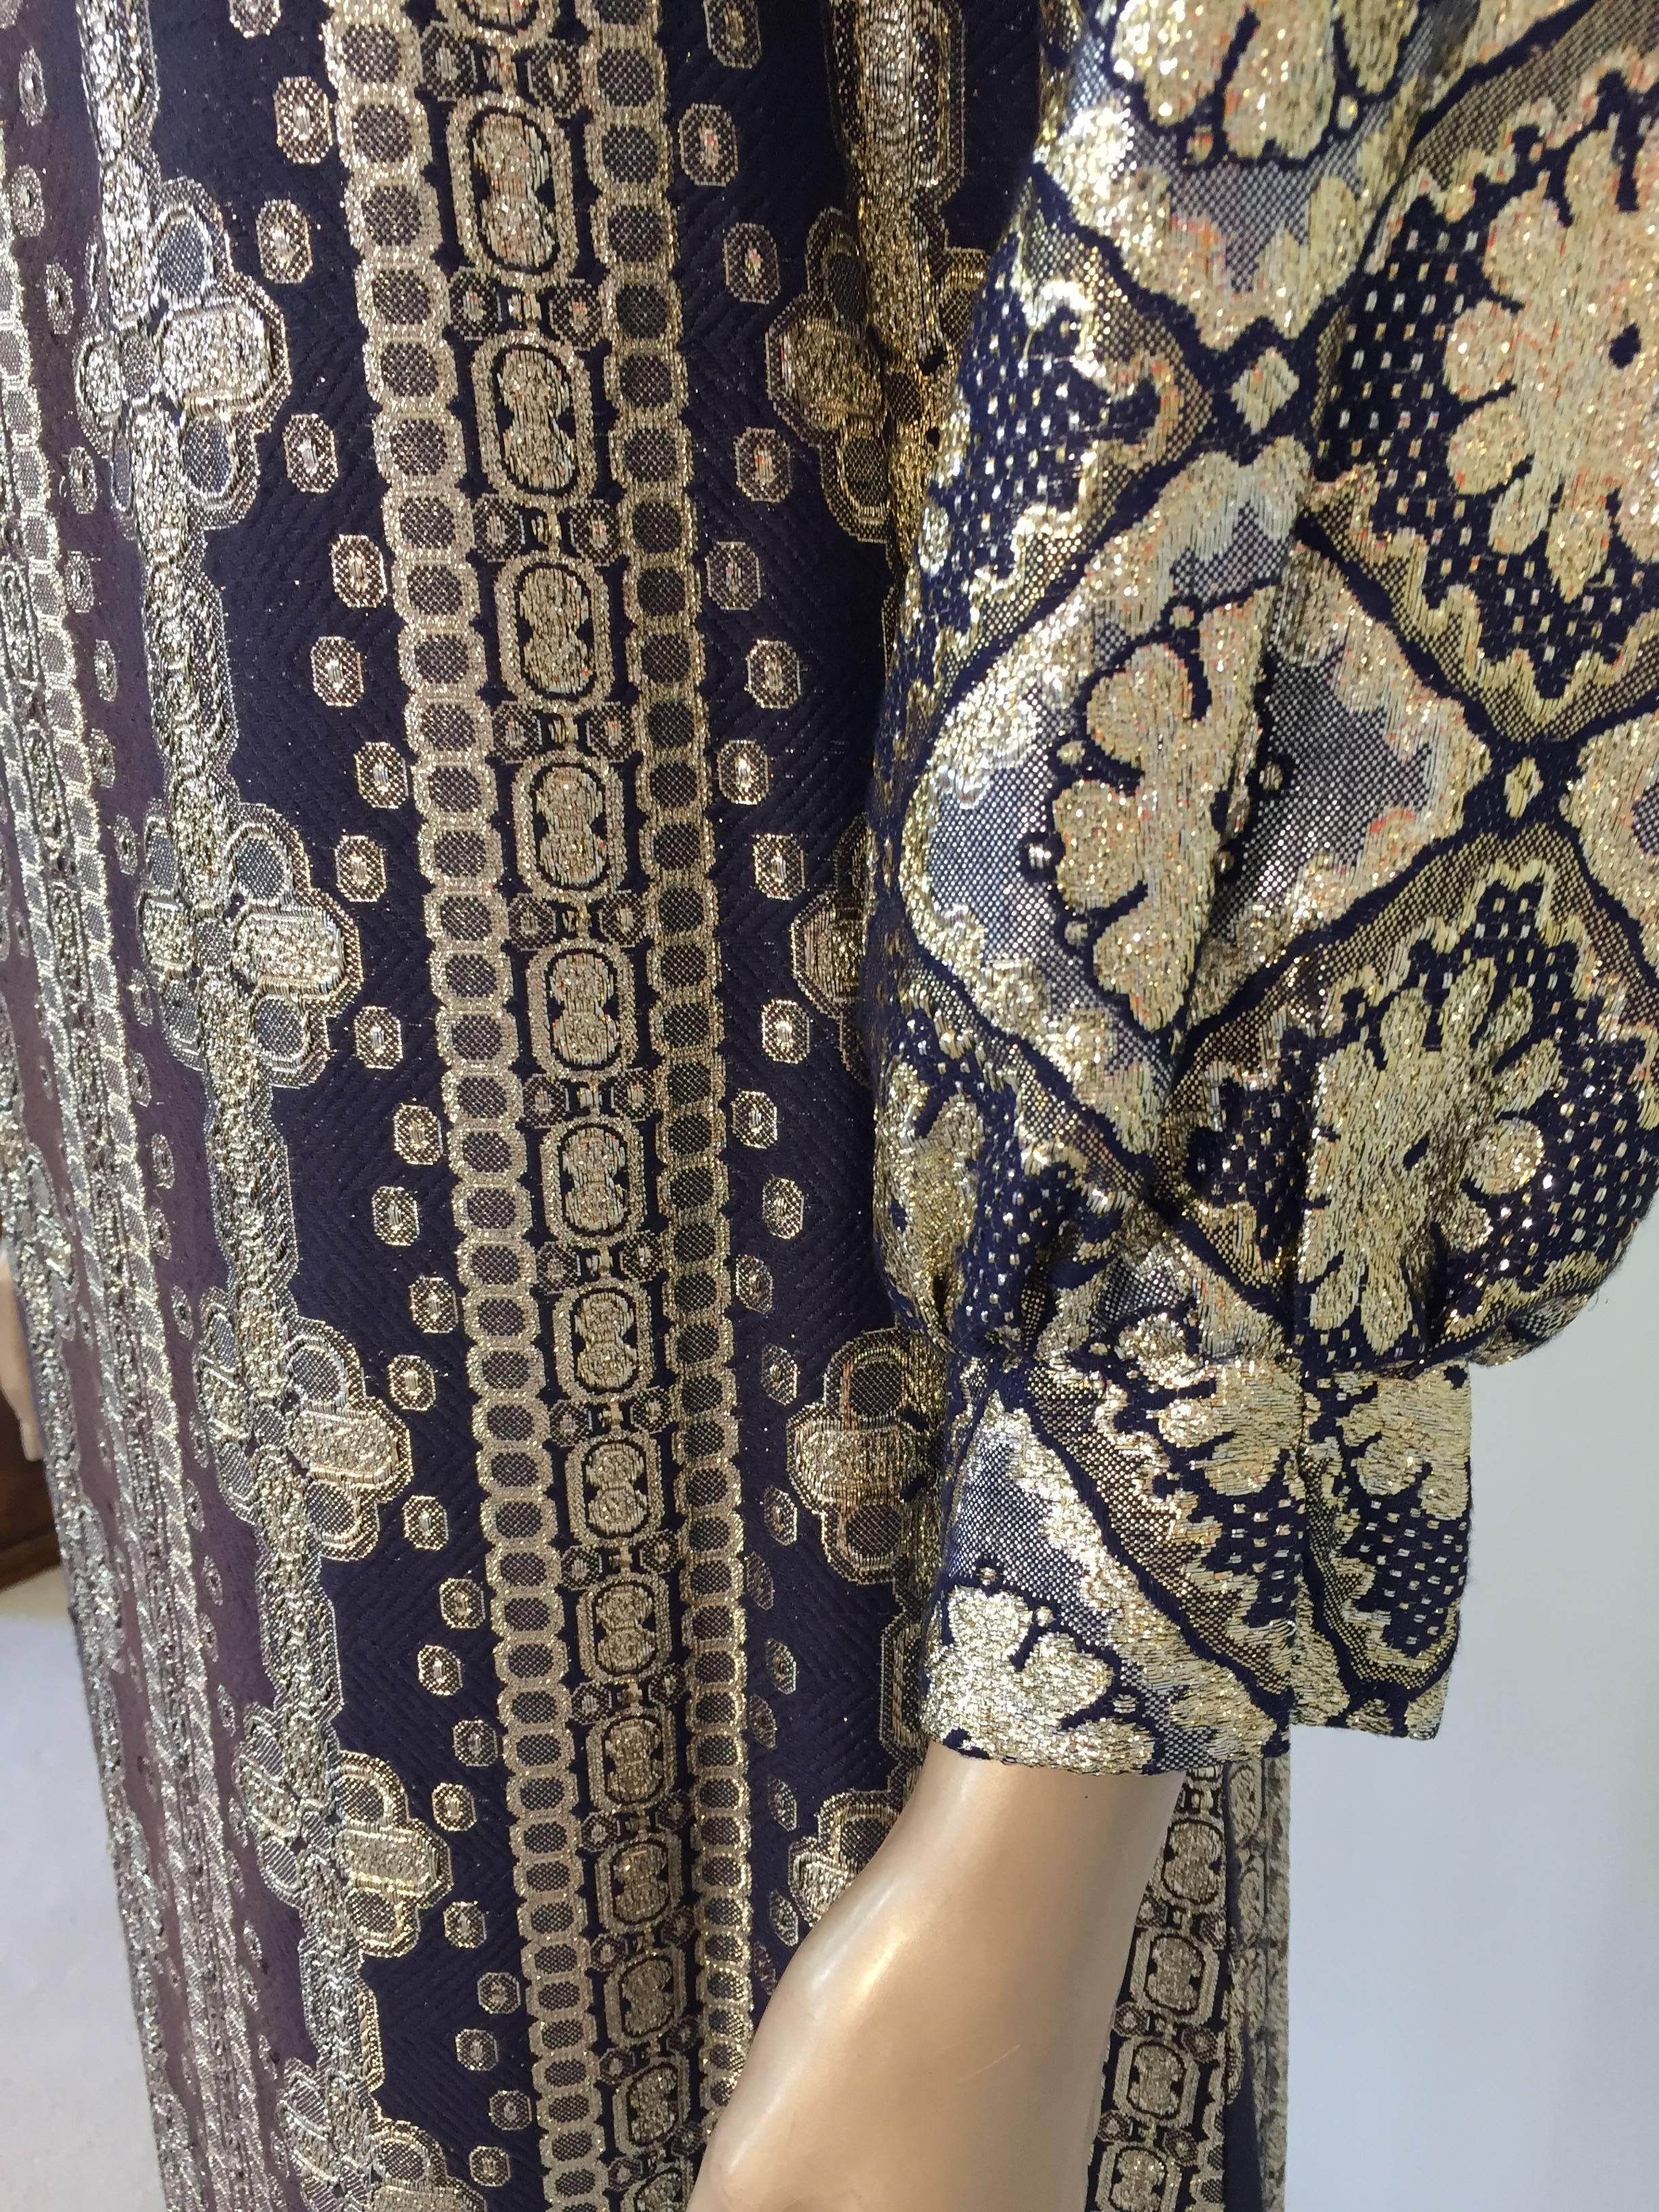 Vintage Brocade Caftan by Bob Cunningham Nellica Beitner Neiman Marcus Size S In Good Condition For Sale In North Hollywood, CA